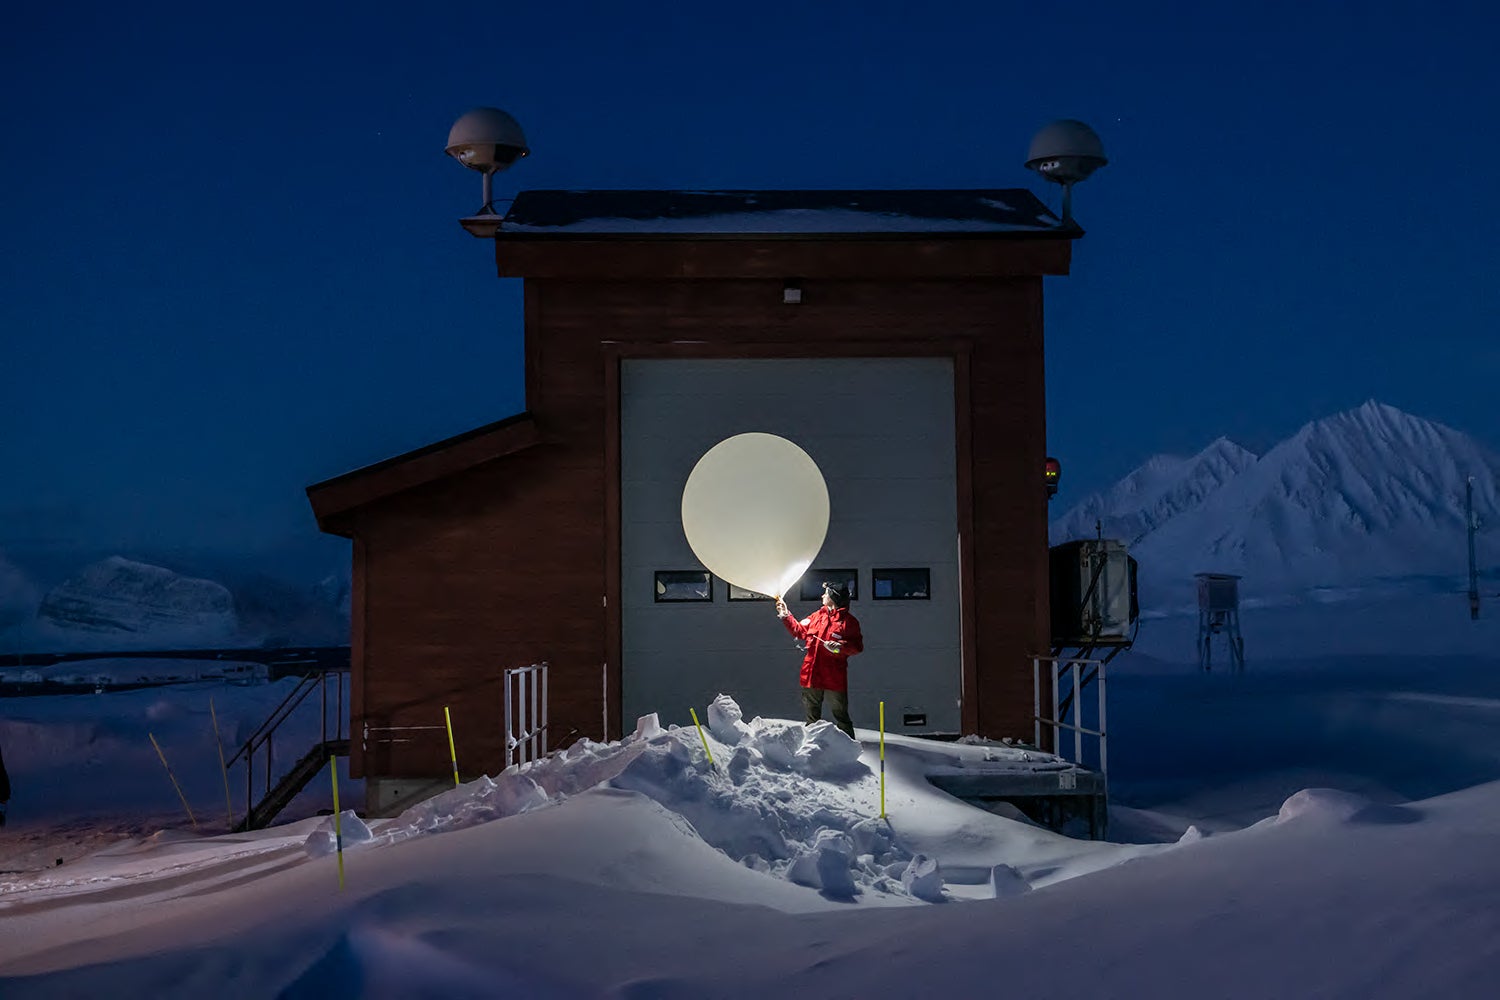 Scientist releases weather balloon at night